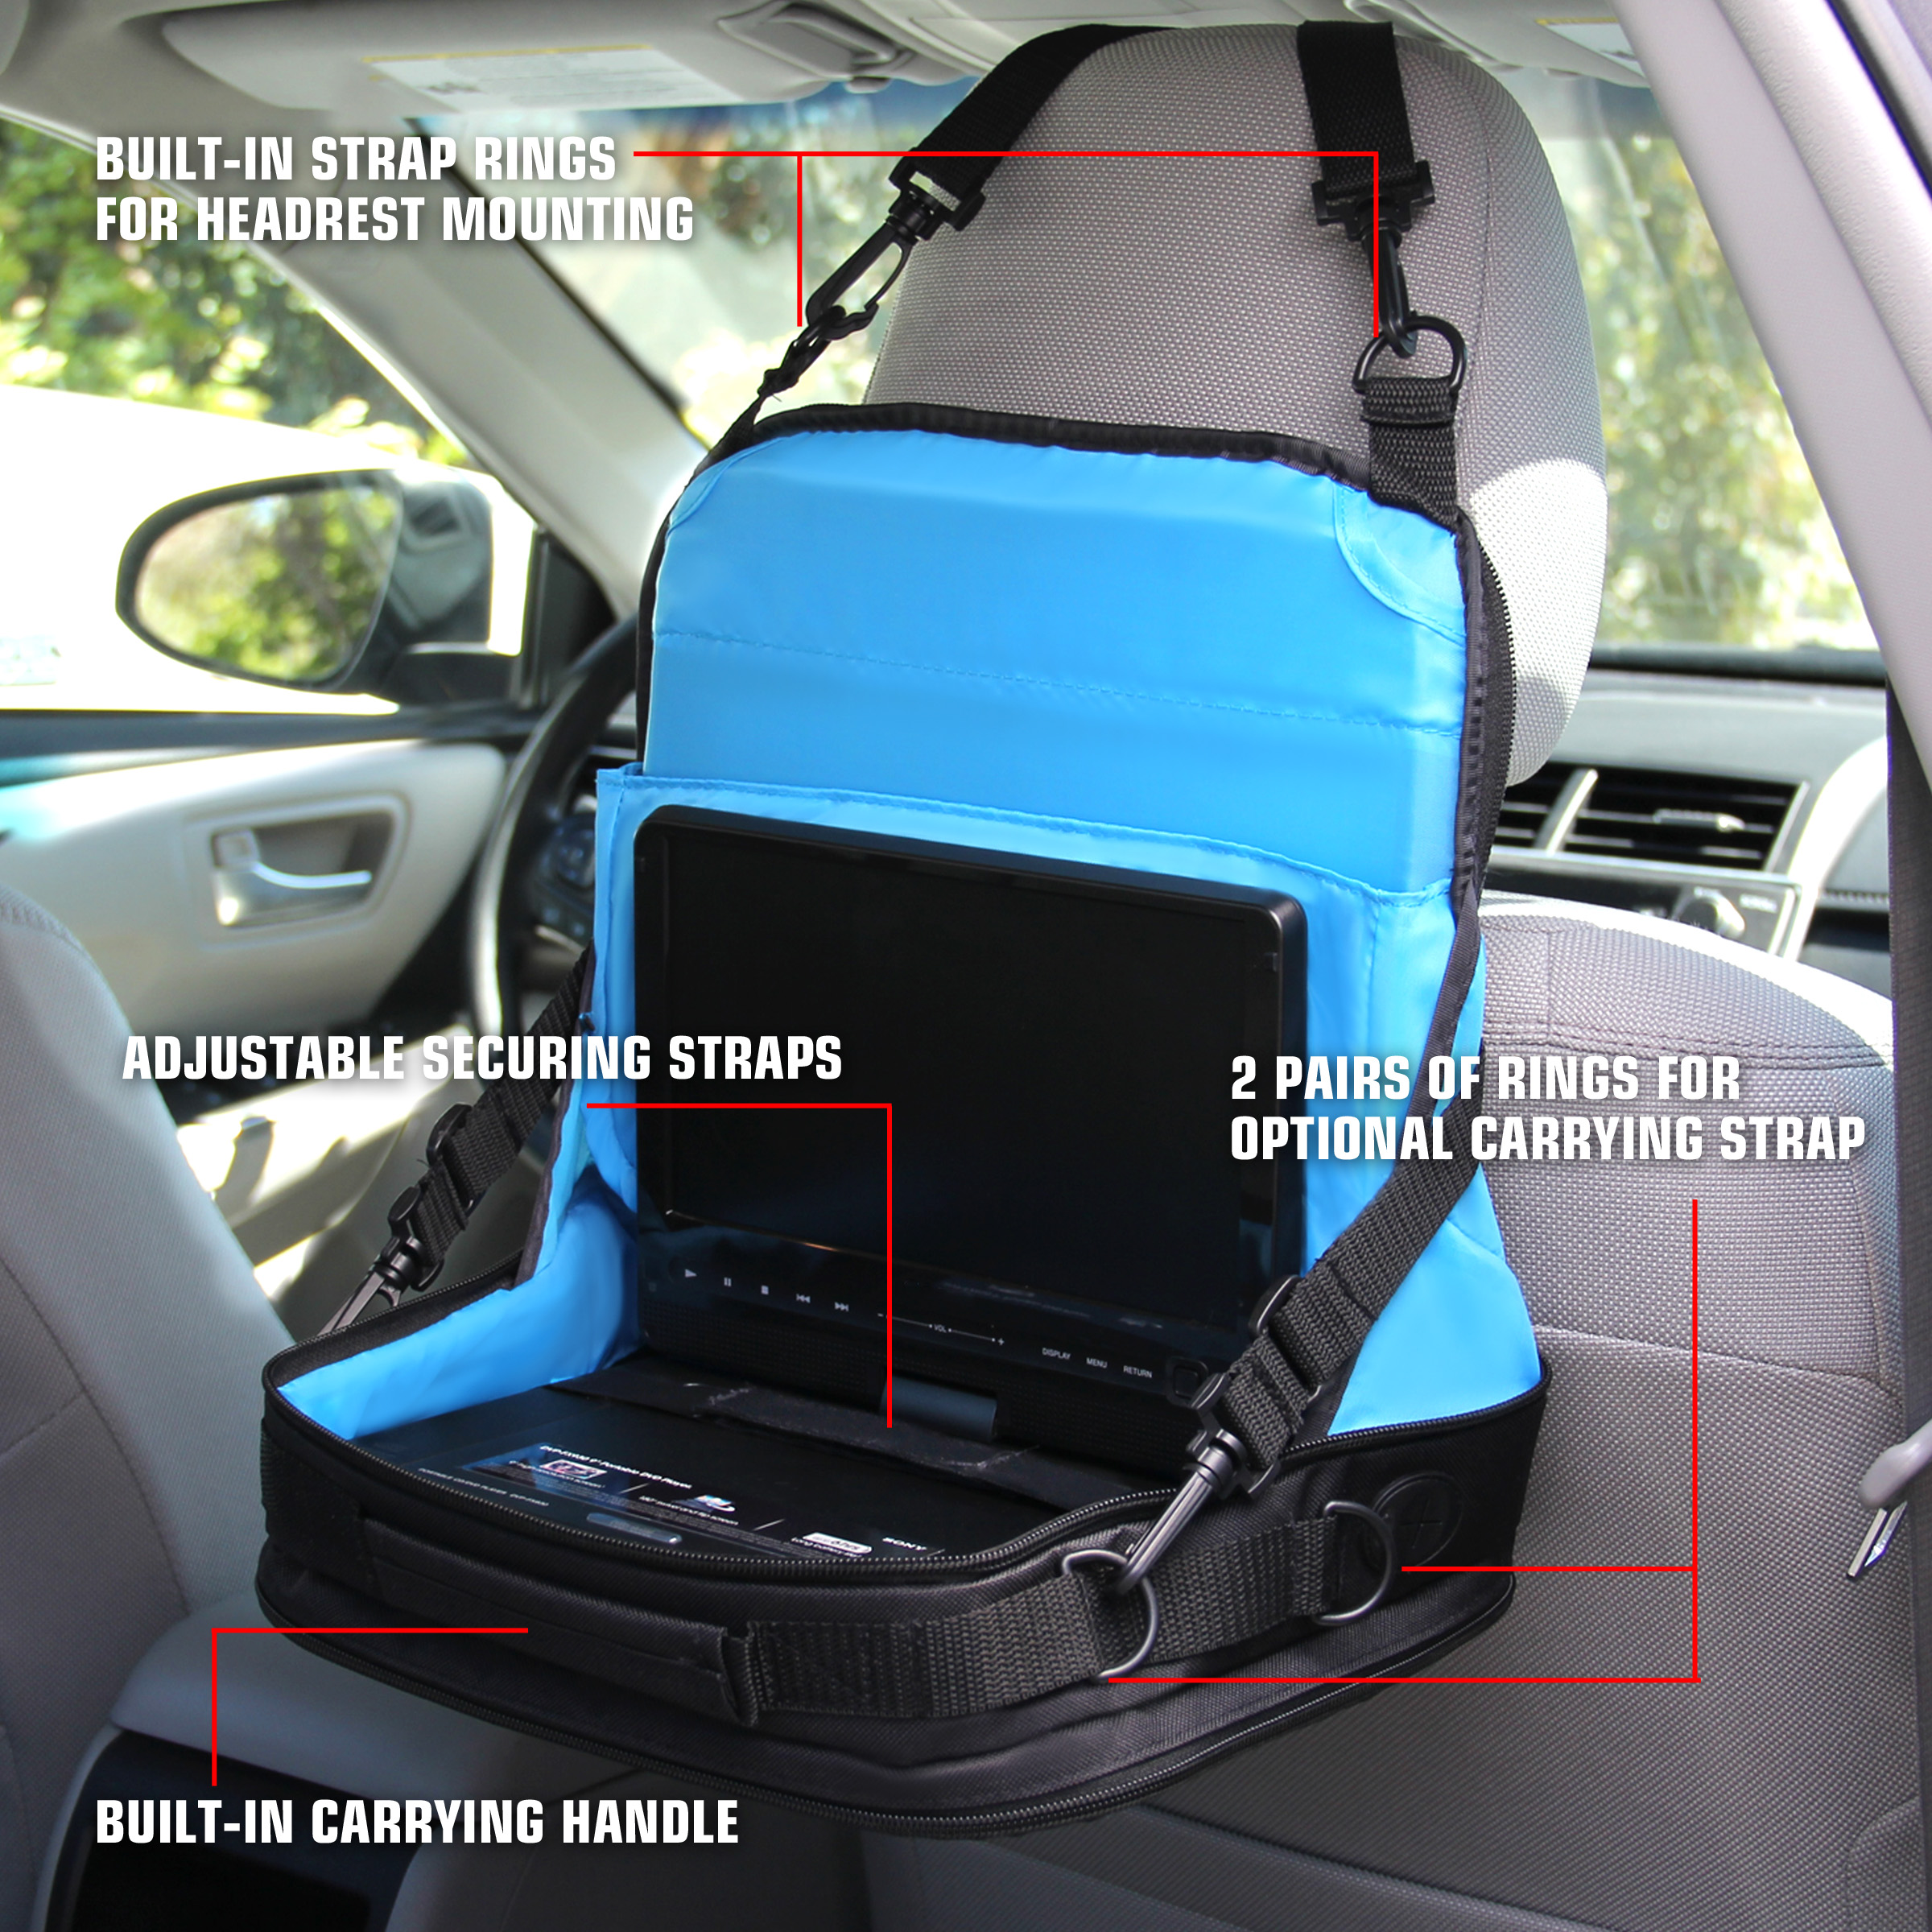 USA Gear Portable DVD Player Headrest Car Mount Case - Storage Bag Fits DB POWER 9.5 Inch, Sylvania SDVD10408, Ematic EPD909, Azend BDP-M1061, Sony BDPSX910, & More 7-10 Blu-ray / DVD Players - image 4 of 9